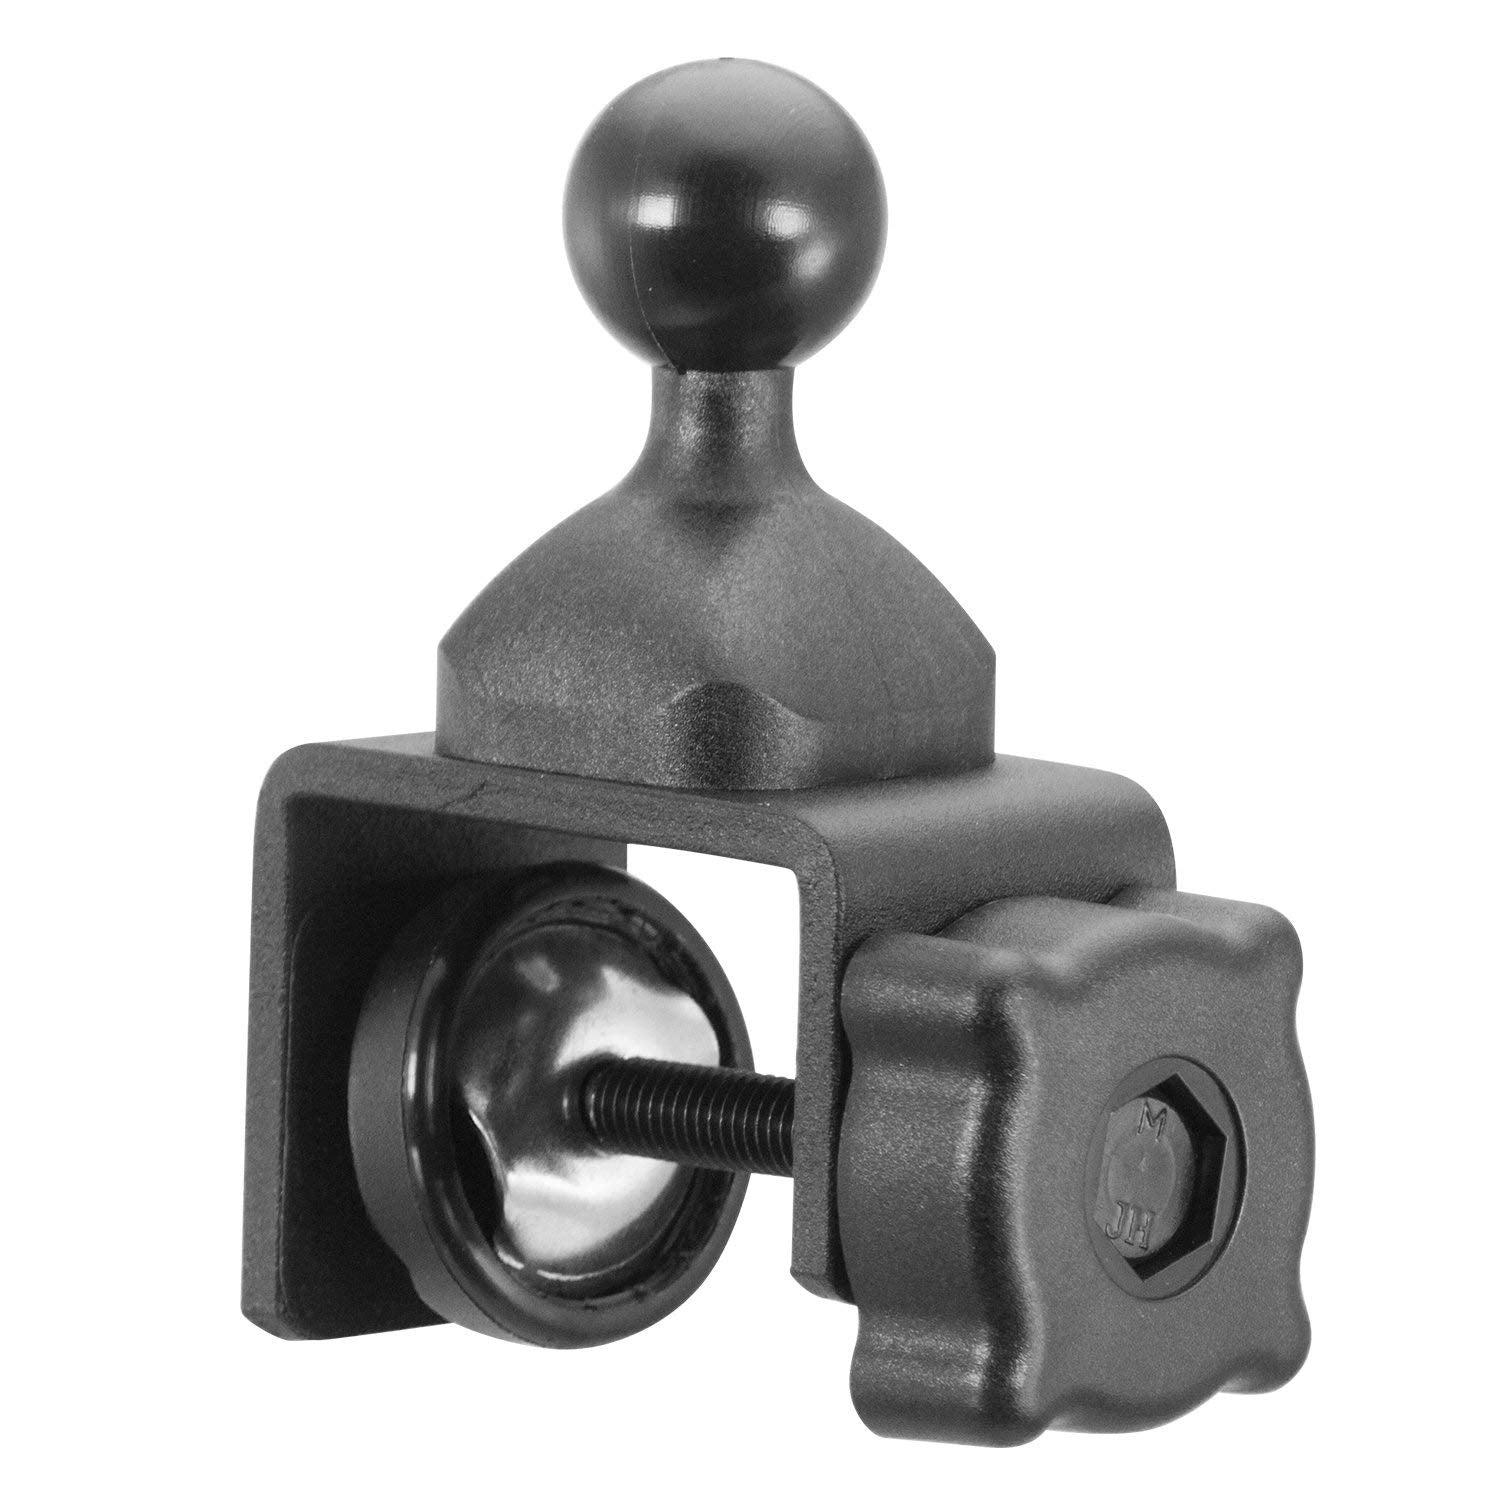 iBOLT™ 25MM/ 1 INCH/ B SIZE Metal C-Clamp Mount